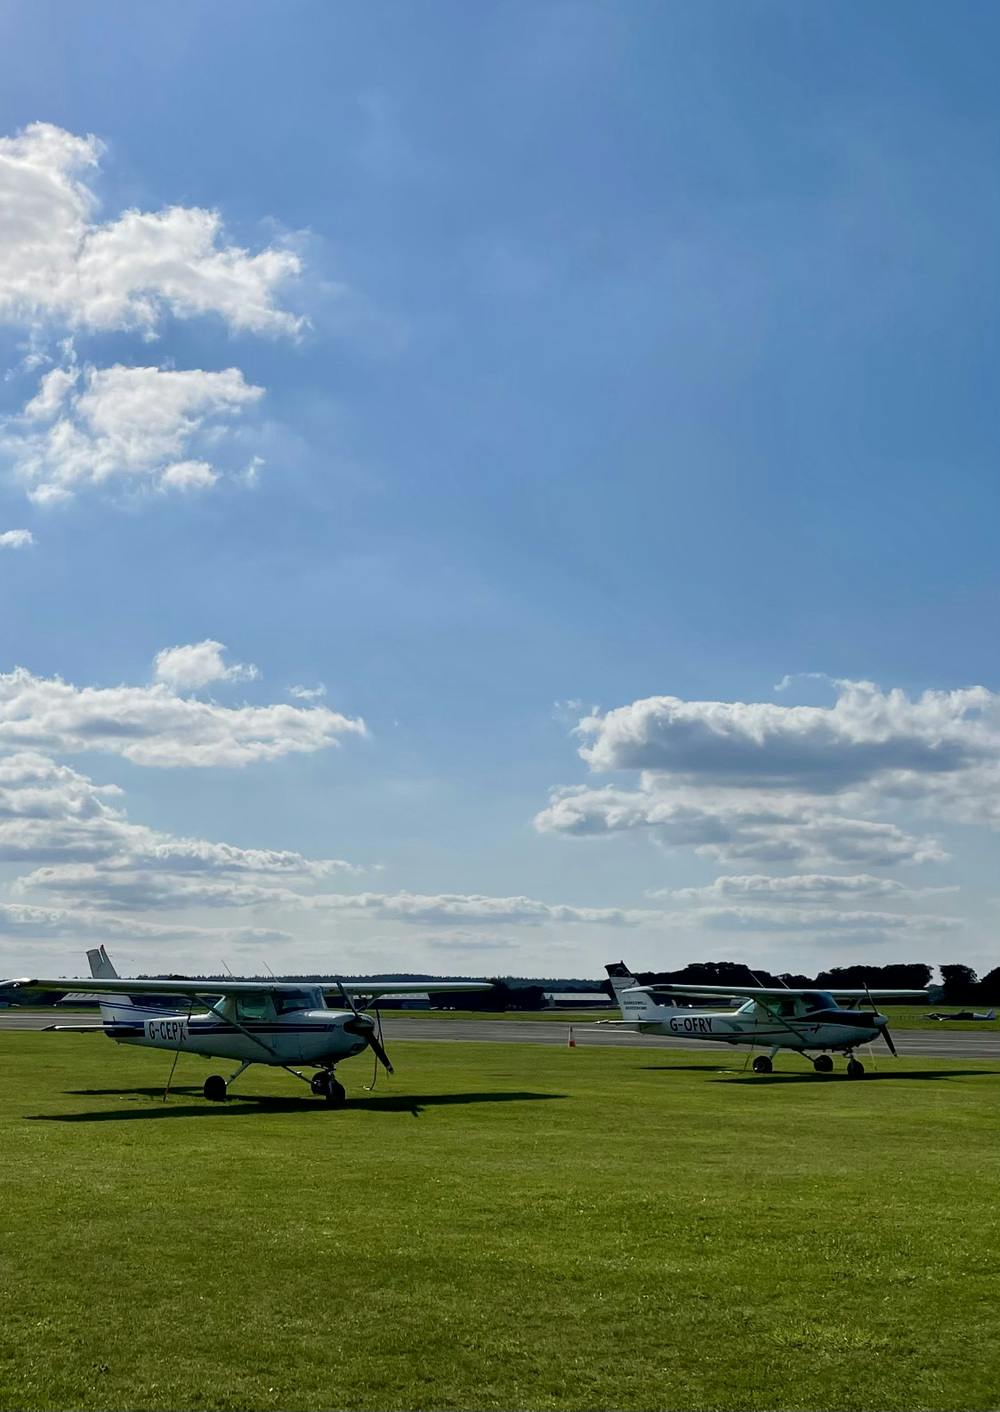 Two planes side by side at Dunkeswell Airfield